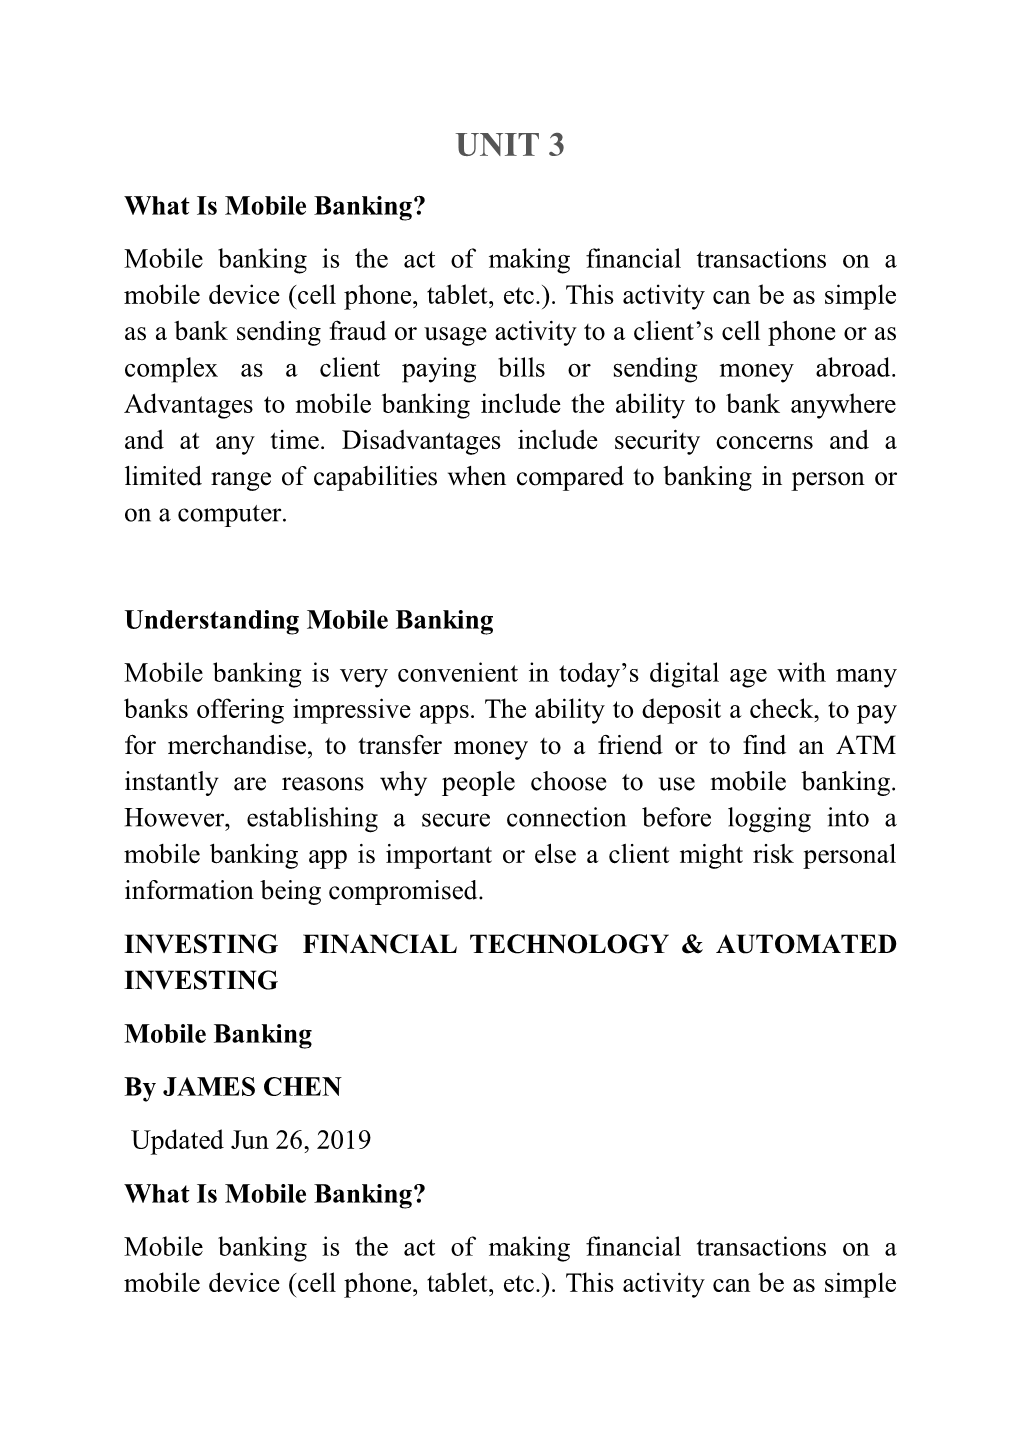 What Is Mobile Banking? Mobile Banking Is the Act of Making Financial Transactions on a Mobile Device (Cell Phone, Tablet, Etc.)